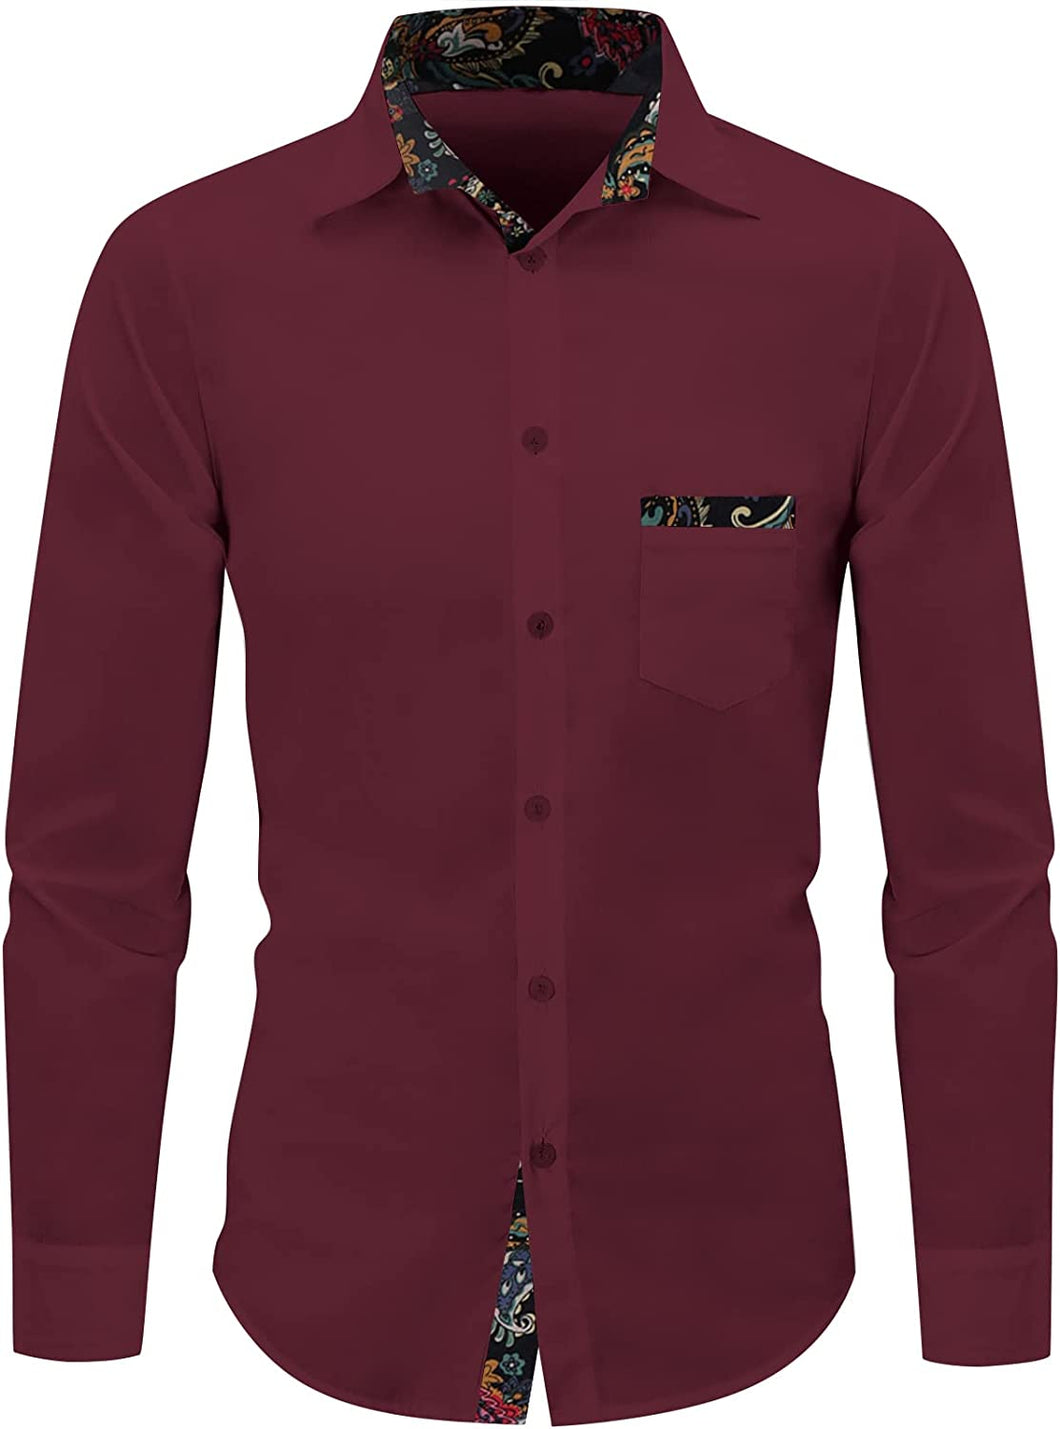 Men's Casual Floral Touch Burgundy Vintage Long Sleeve Shirt